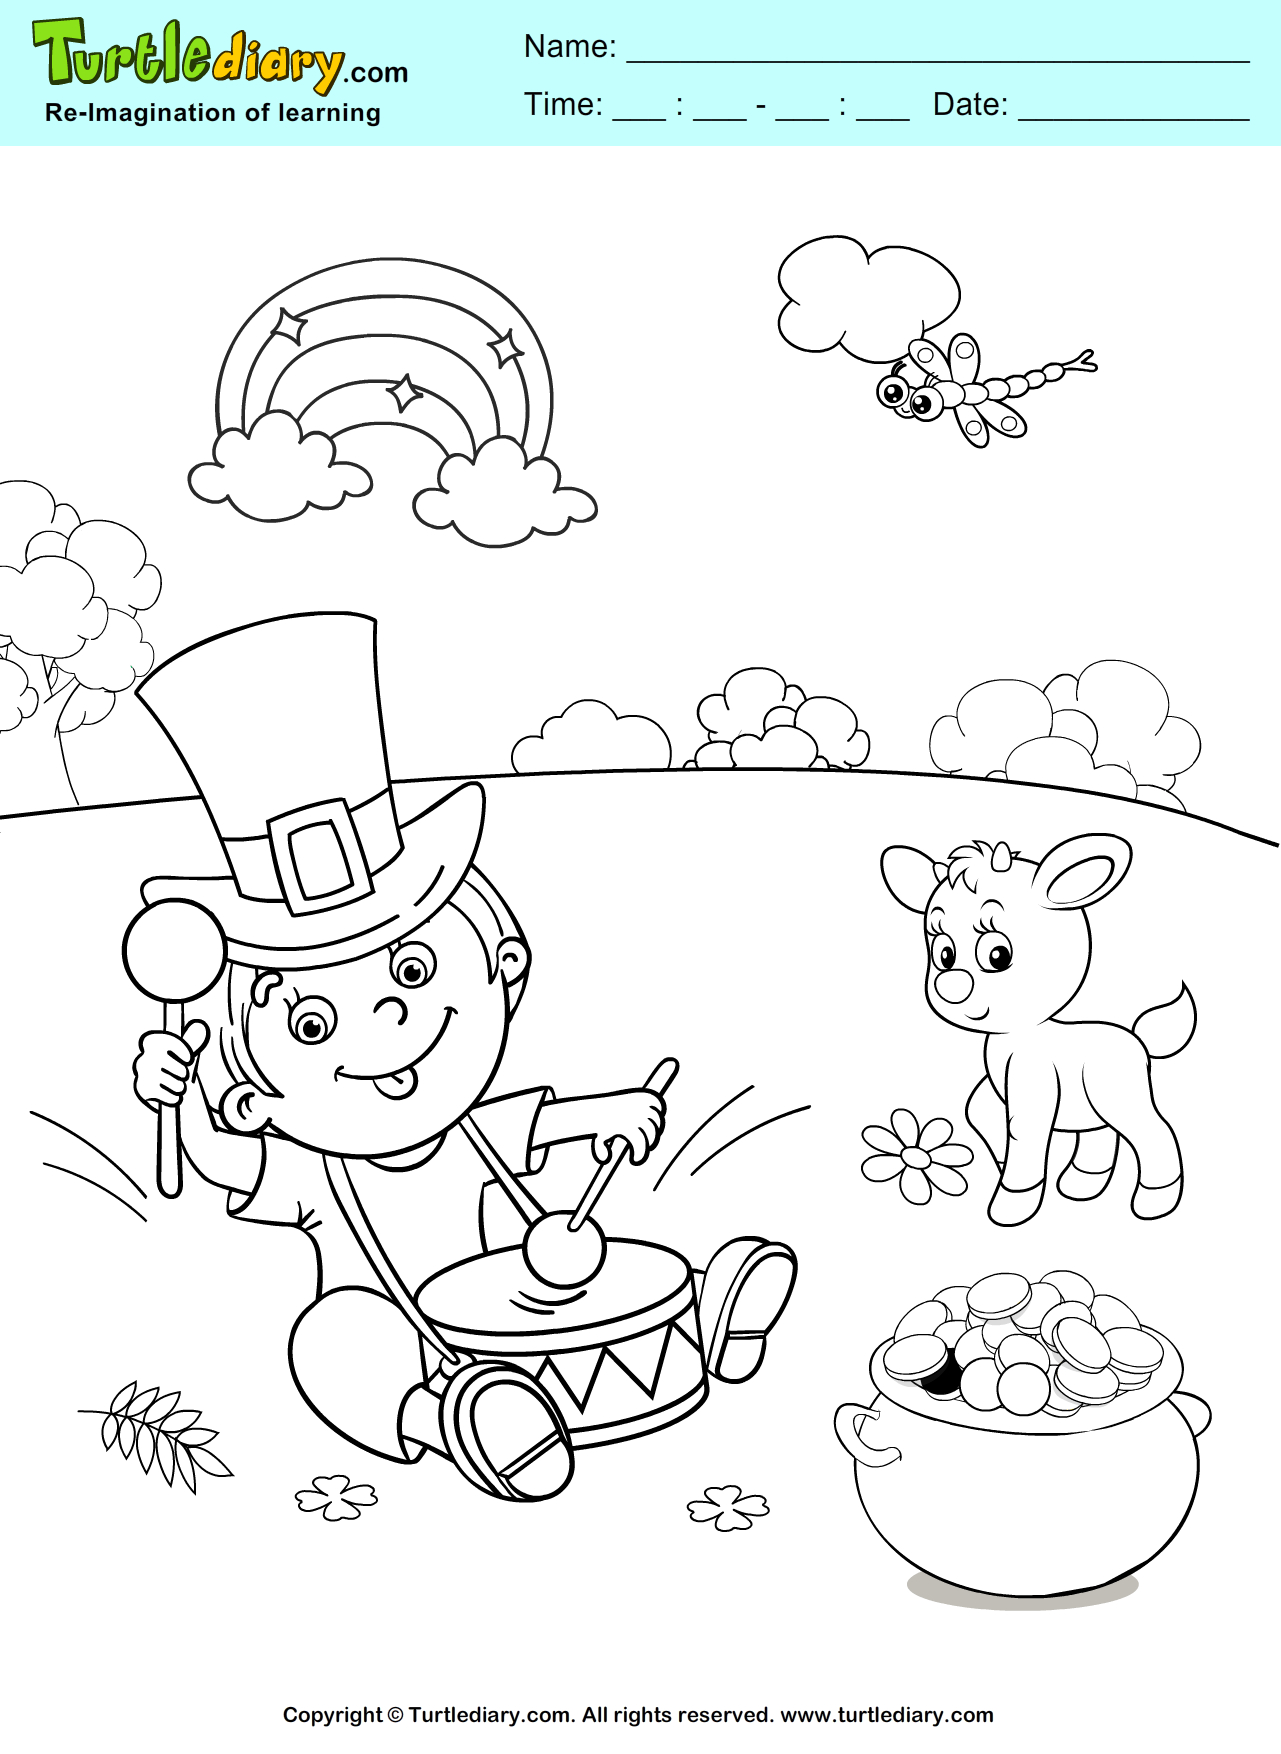 Coloring Pages : Free Printablenbow Coloring Sheet Blank In Blank Face Template Preschool